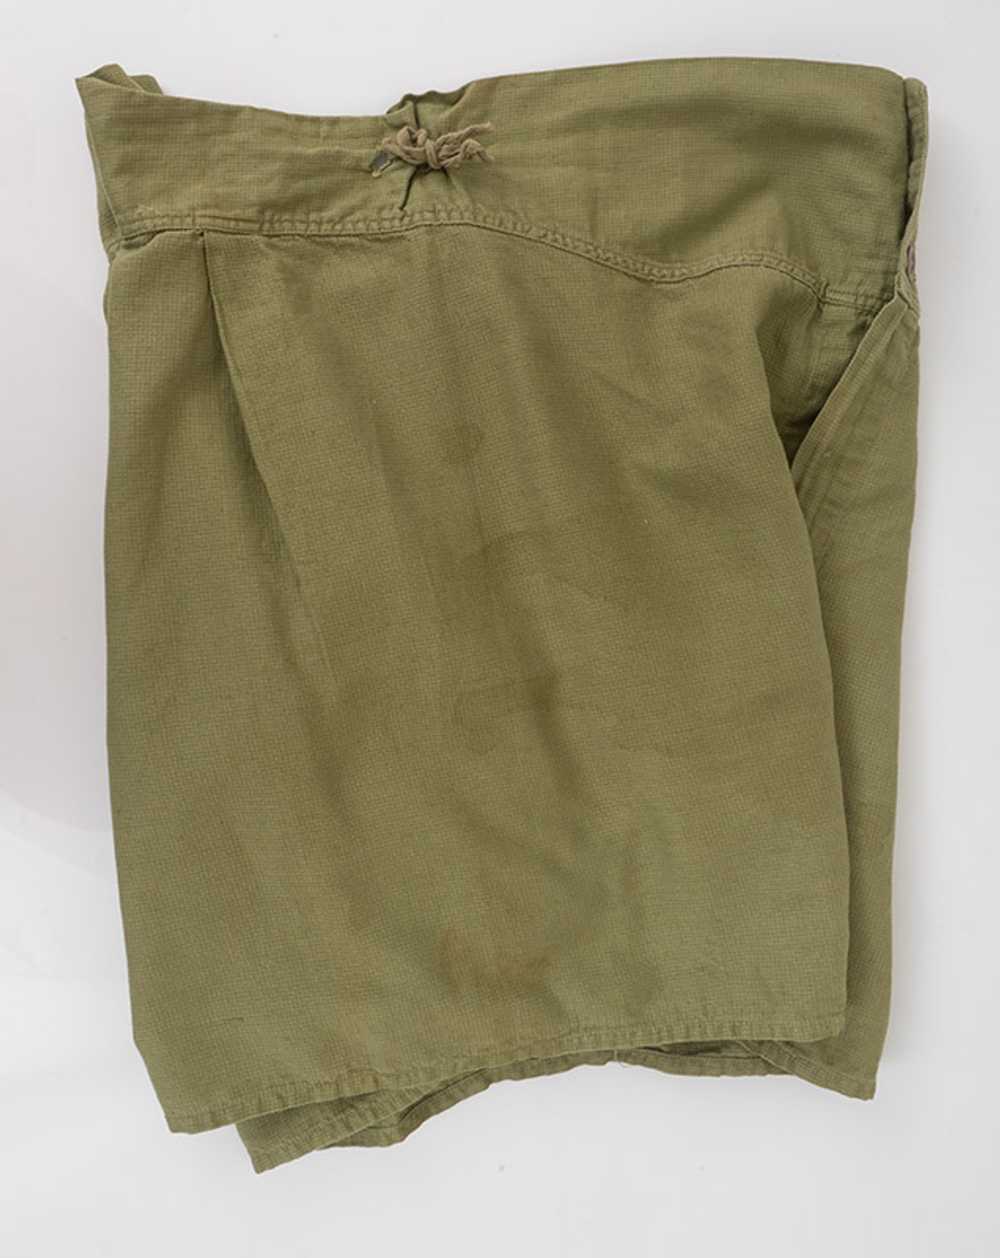 1940s WWII Men's Boxer Shorts - image 1